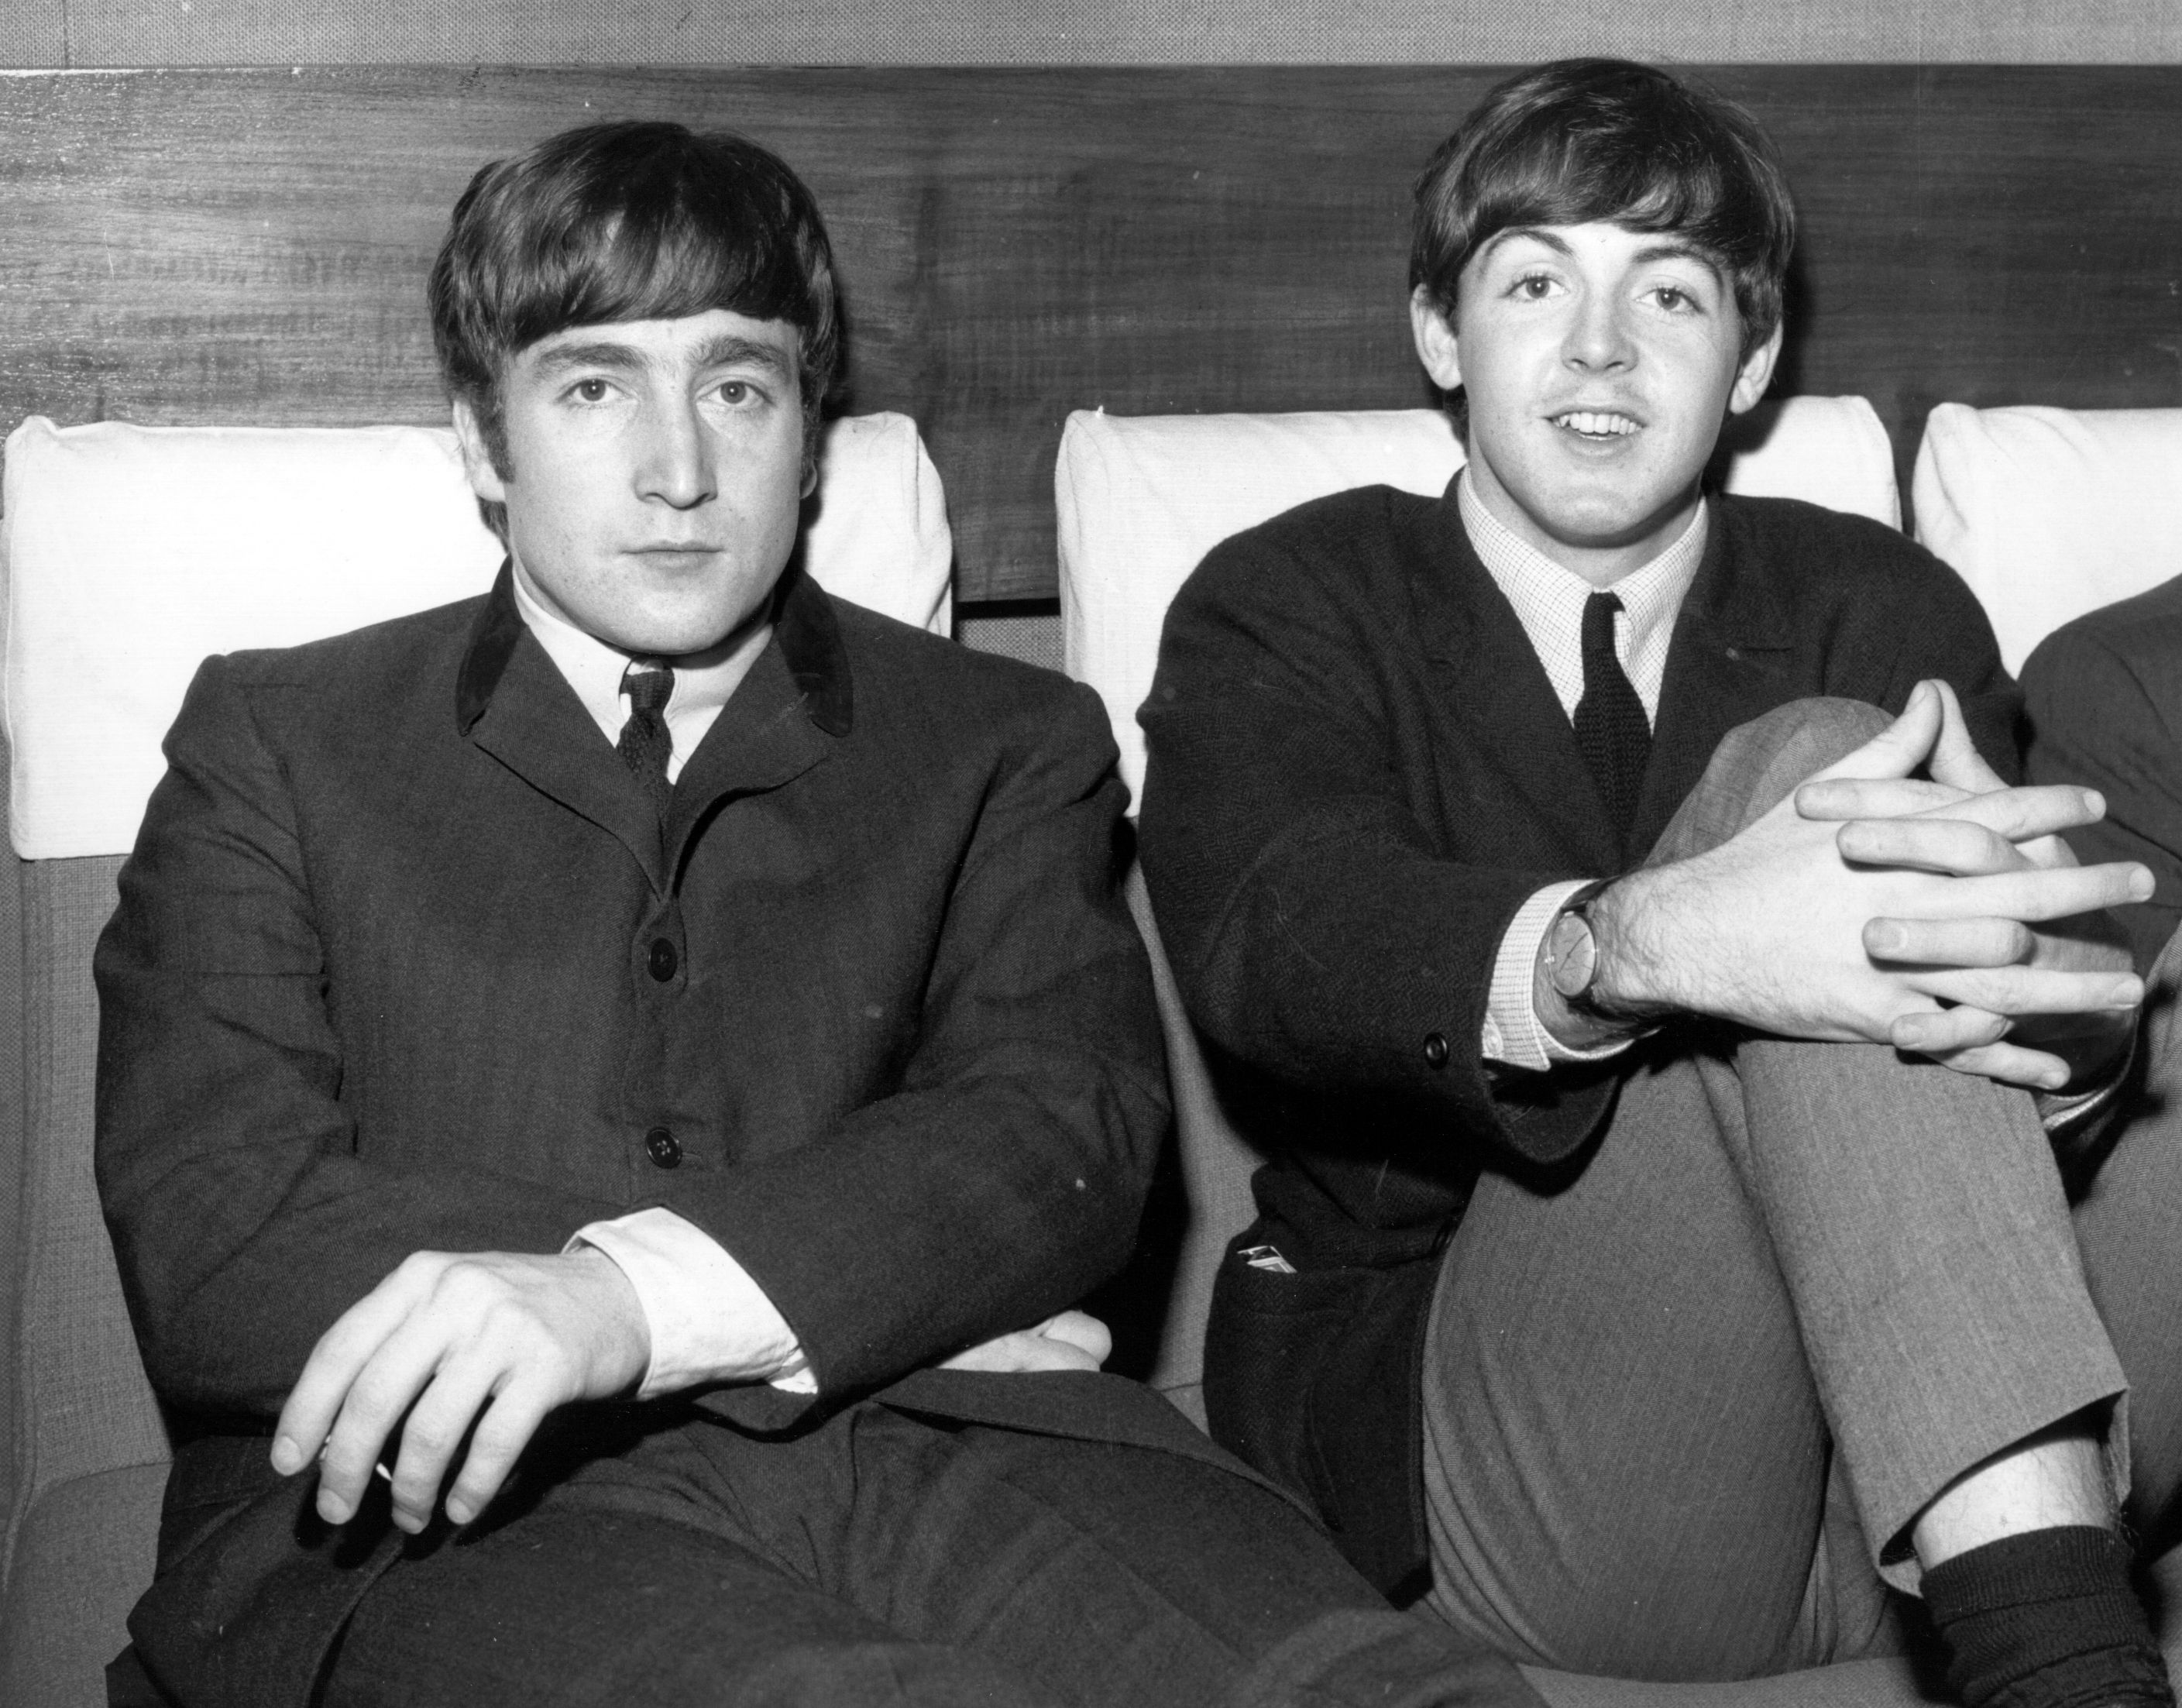 The Beatles' John Lennon and Paul McCartney wearing suits during the "A Hard Day's Night" era